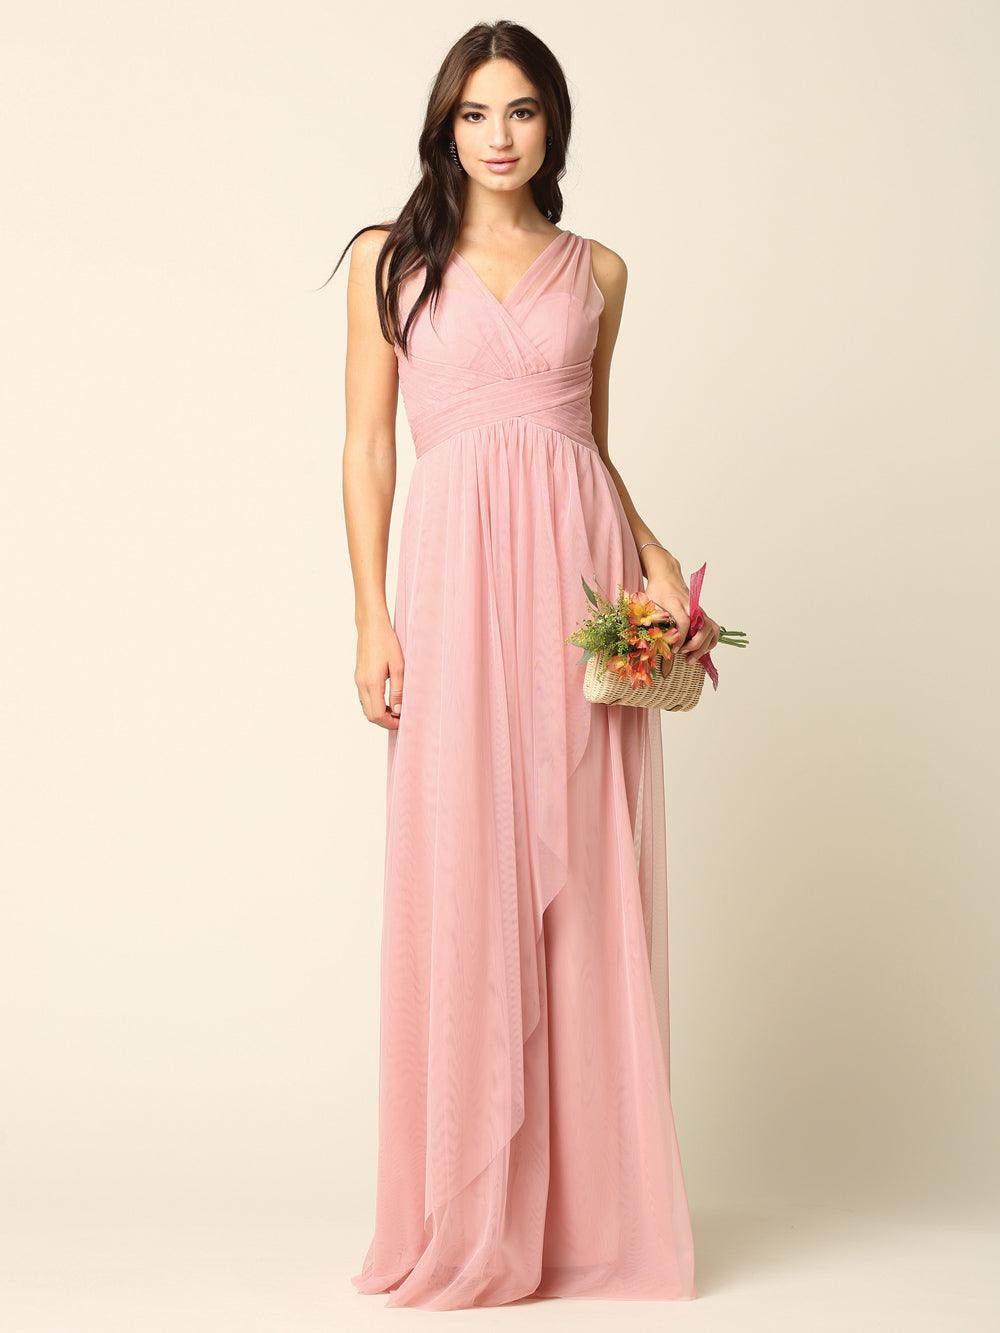 Long Formal Bridesmaids Sleeveless Tulle Dress - The Dress Outlet